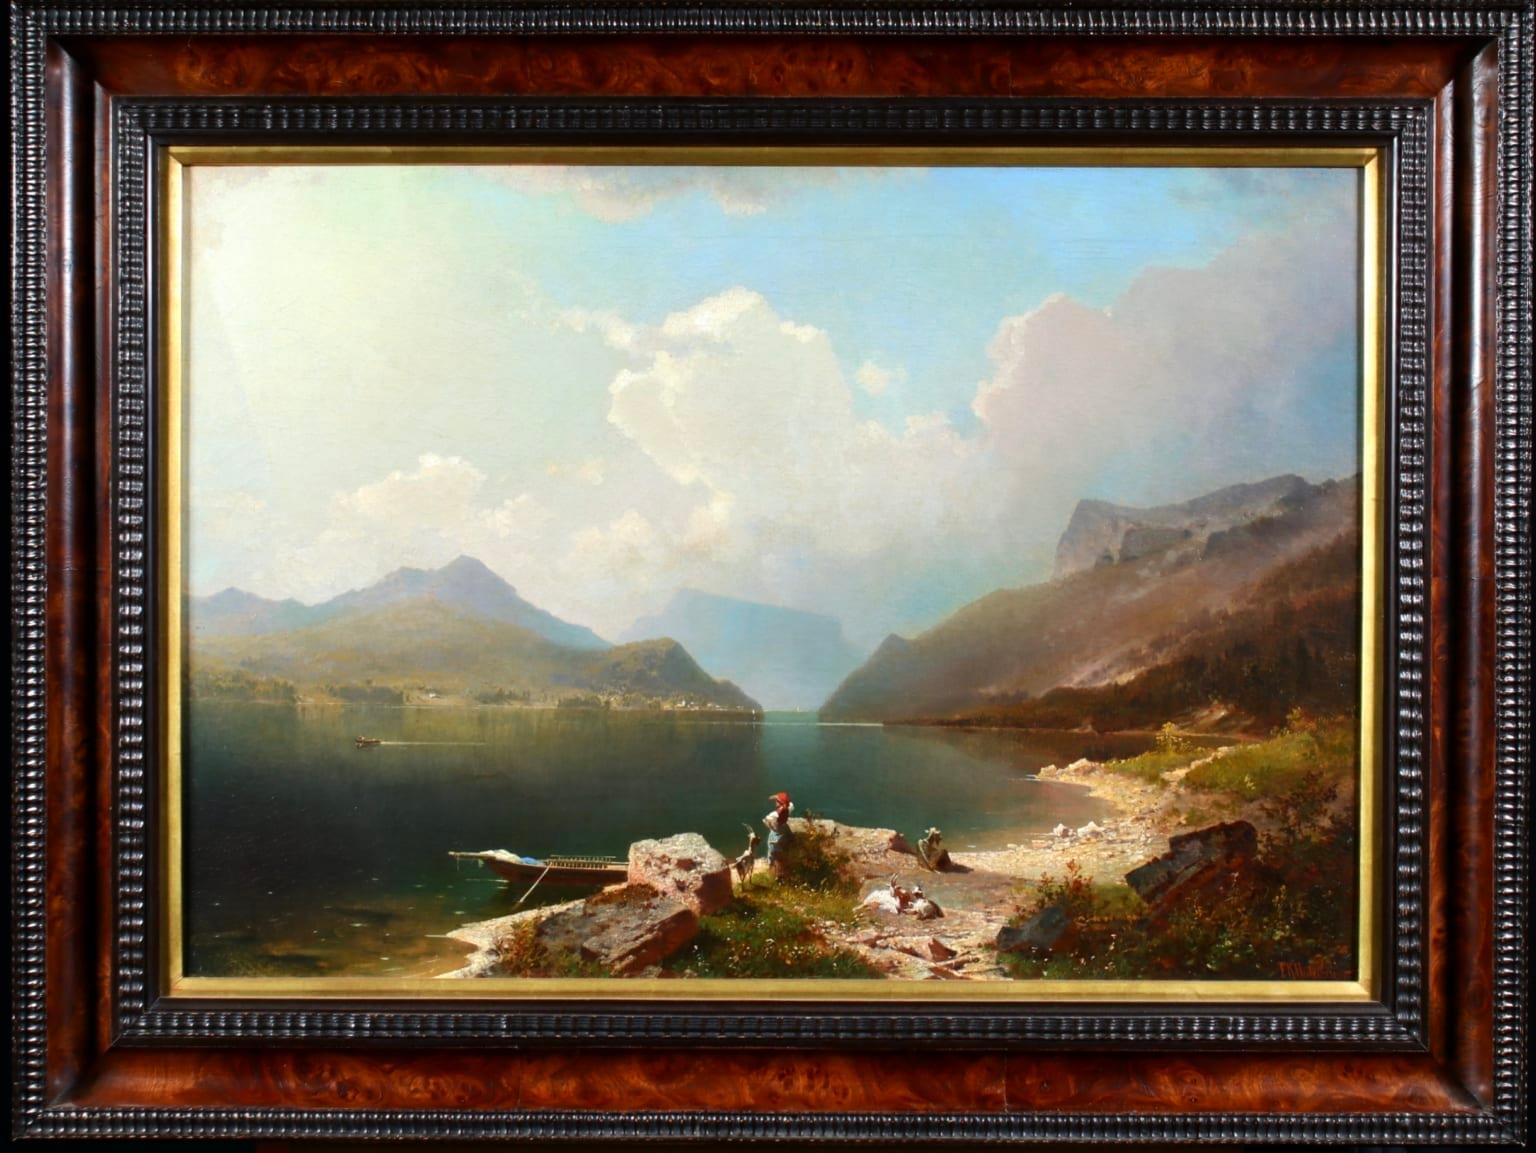 Early Morning-Achen Lake, Austria - Romantic Oil, Figures by Lake by Unterberger - Painting by Franz Richard Unterberger